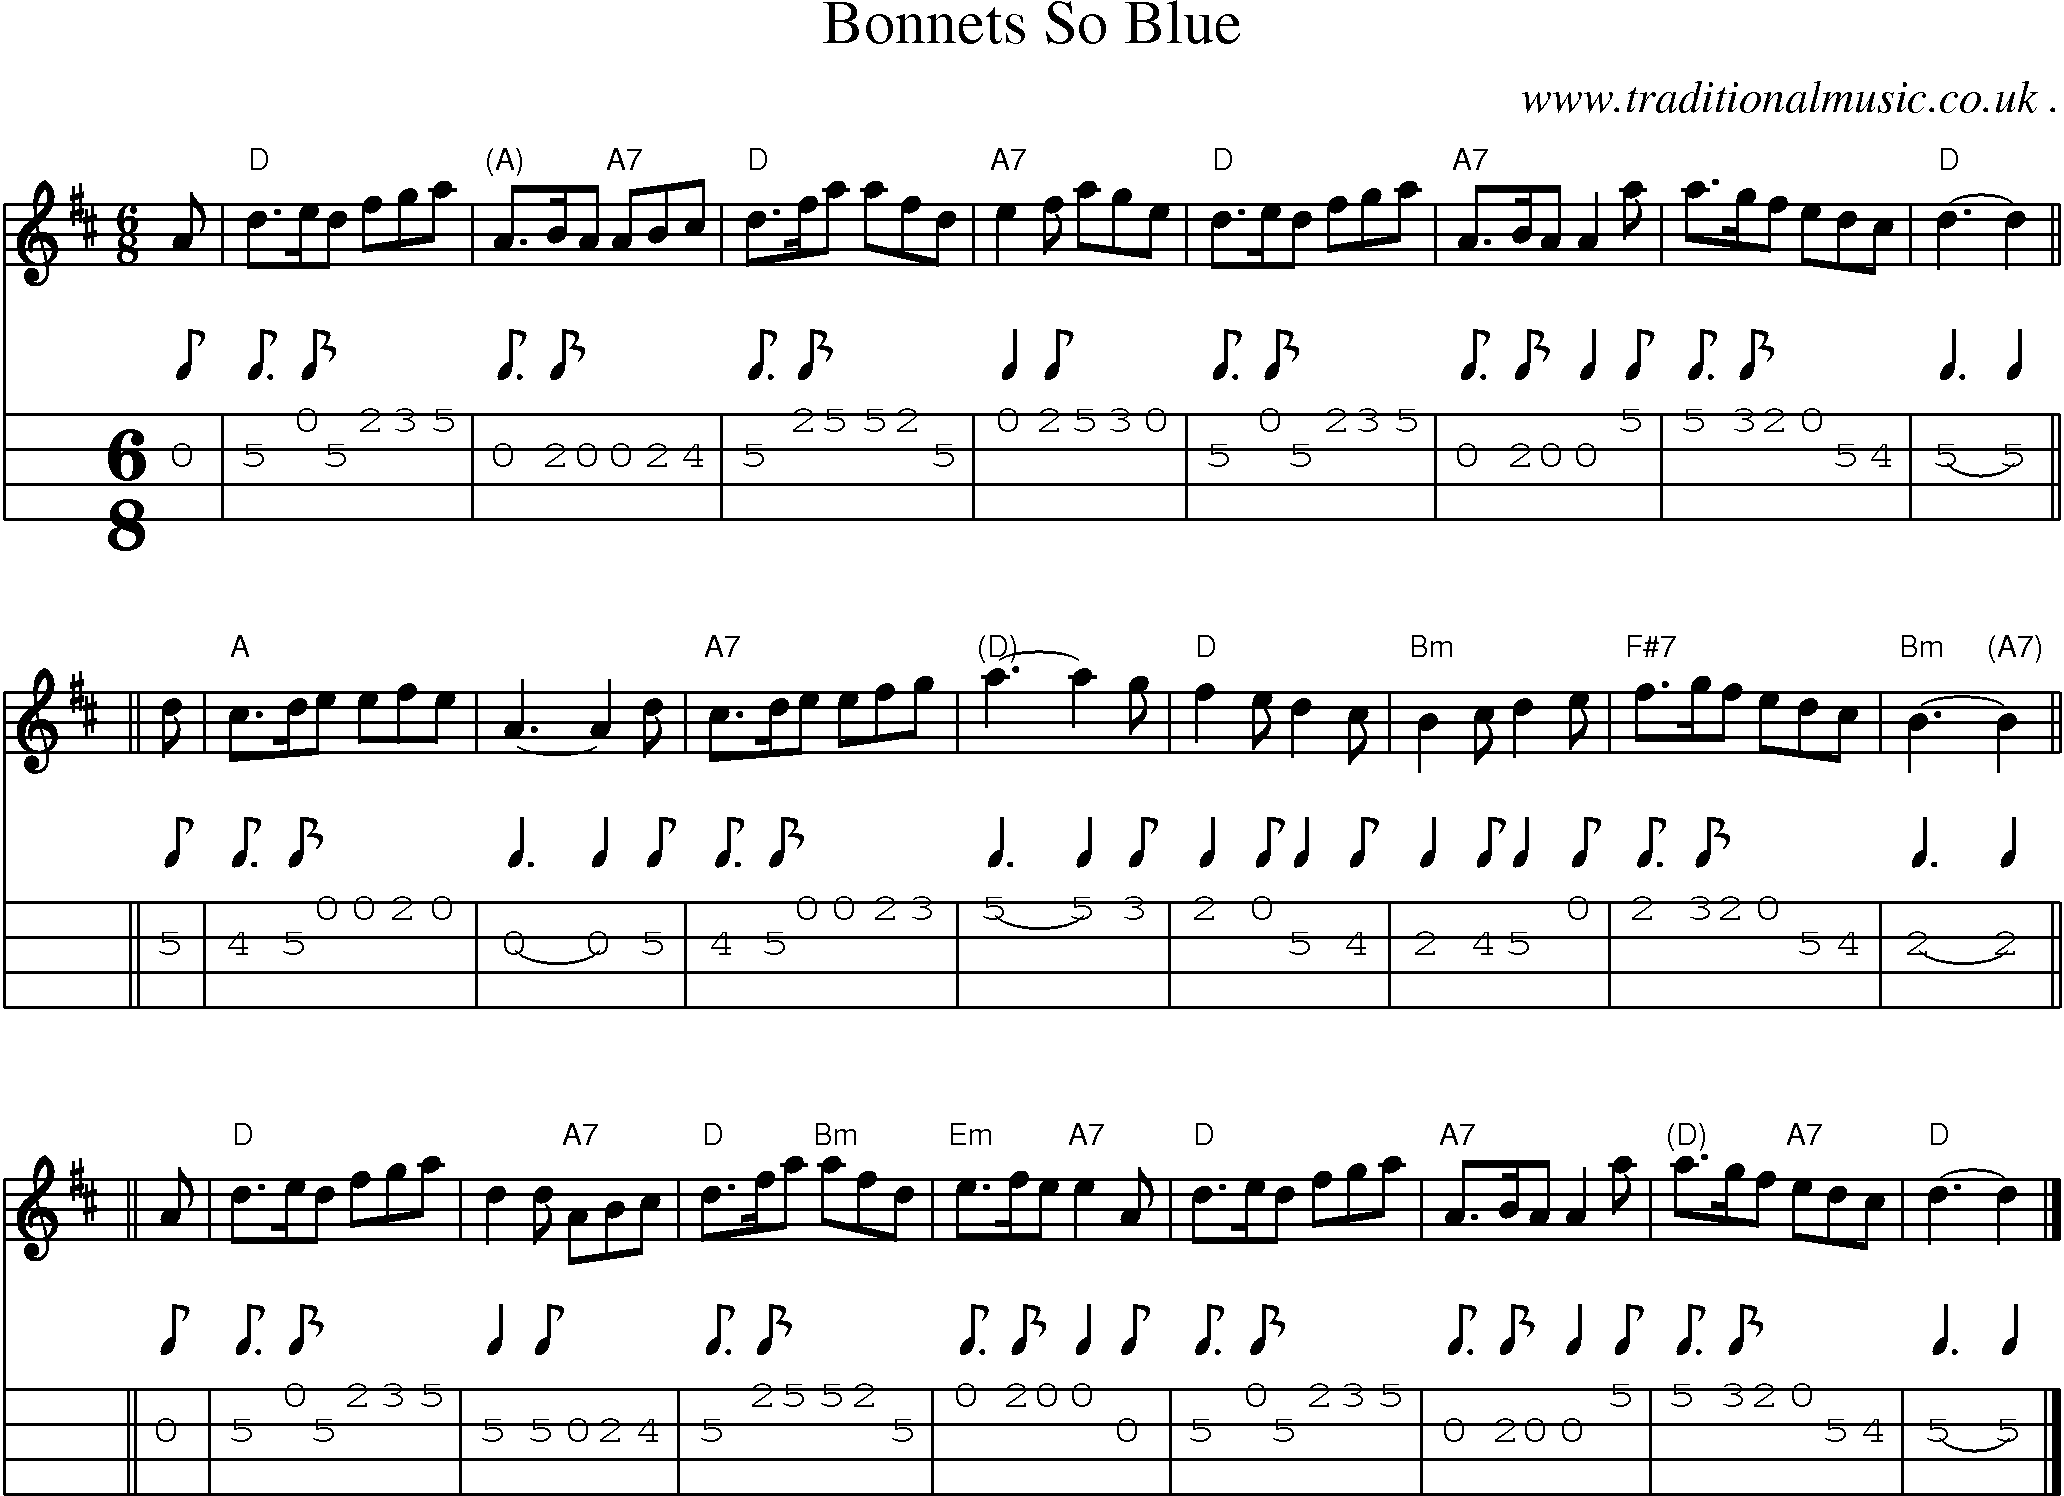 Sheet-music  score, Chords and Mandolin Tabs for Bonnets So Blue